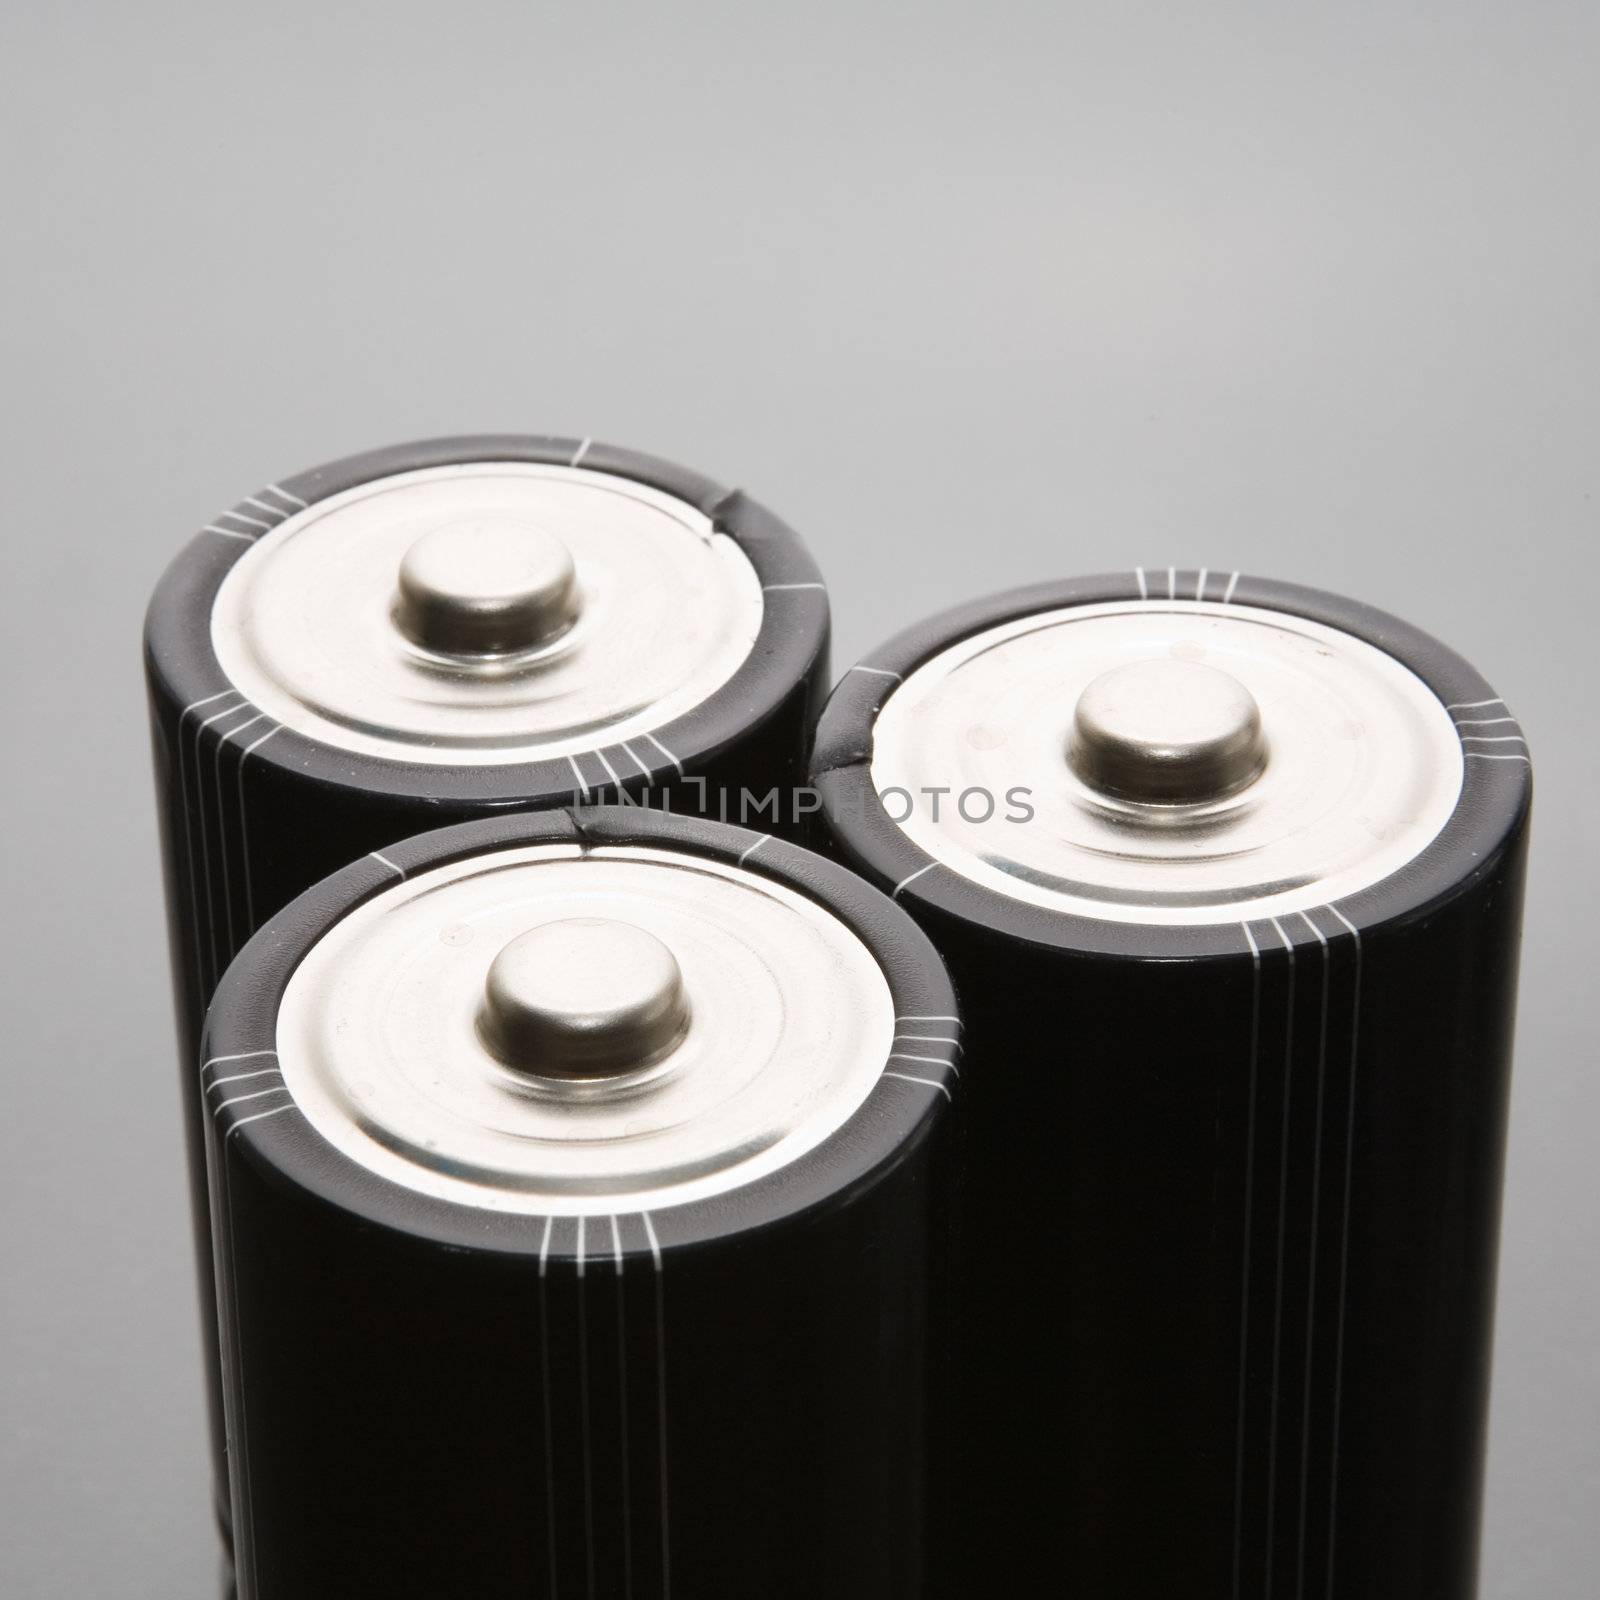 Batteries by Luminis